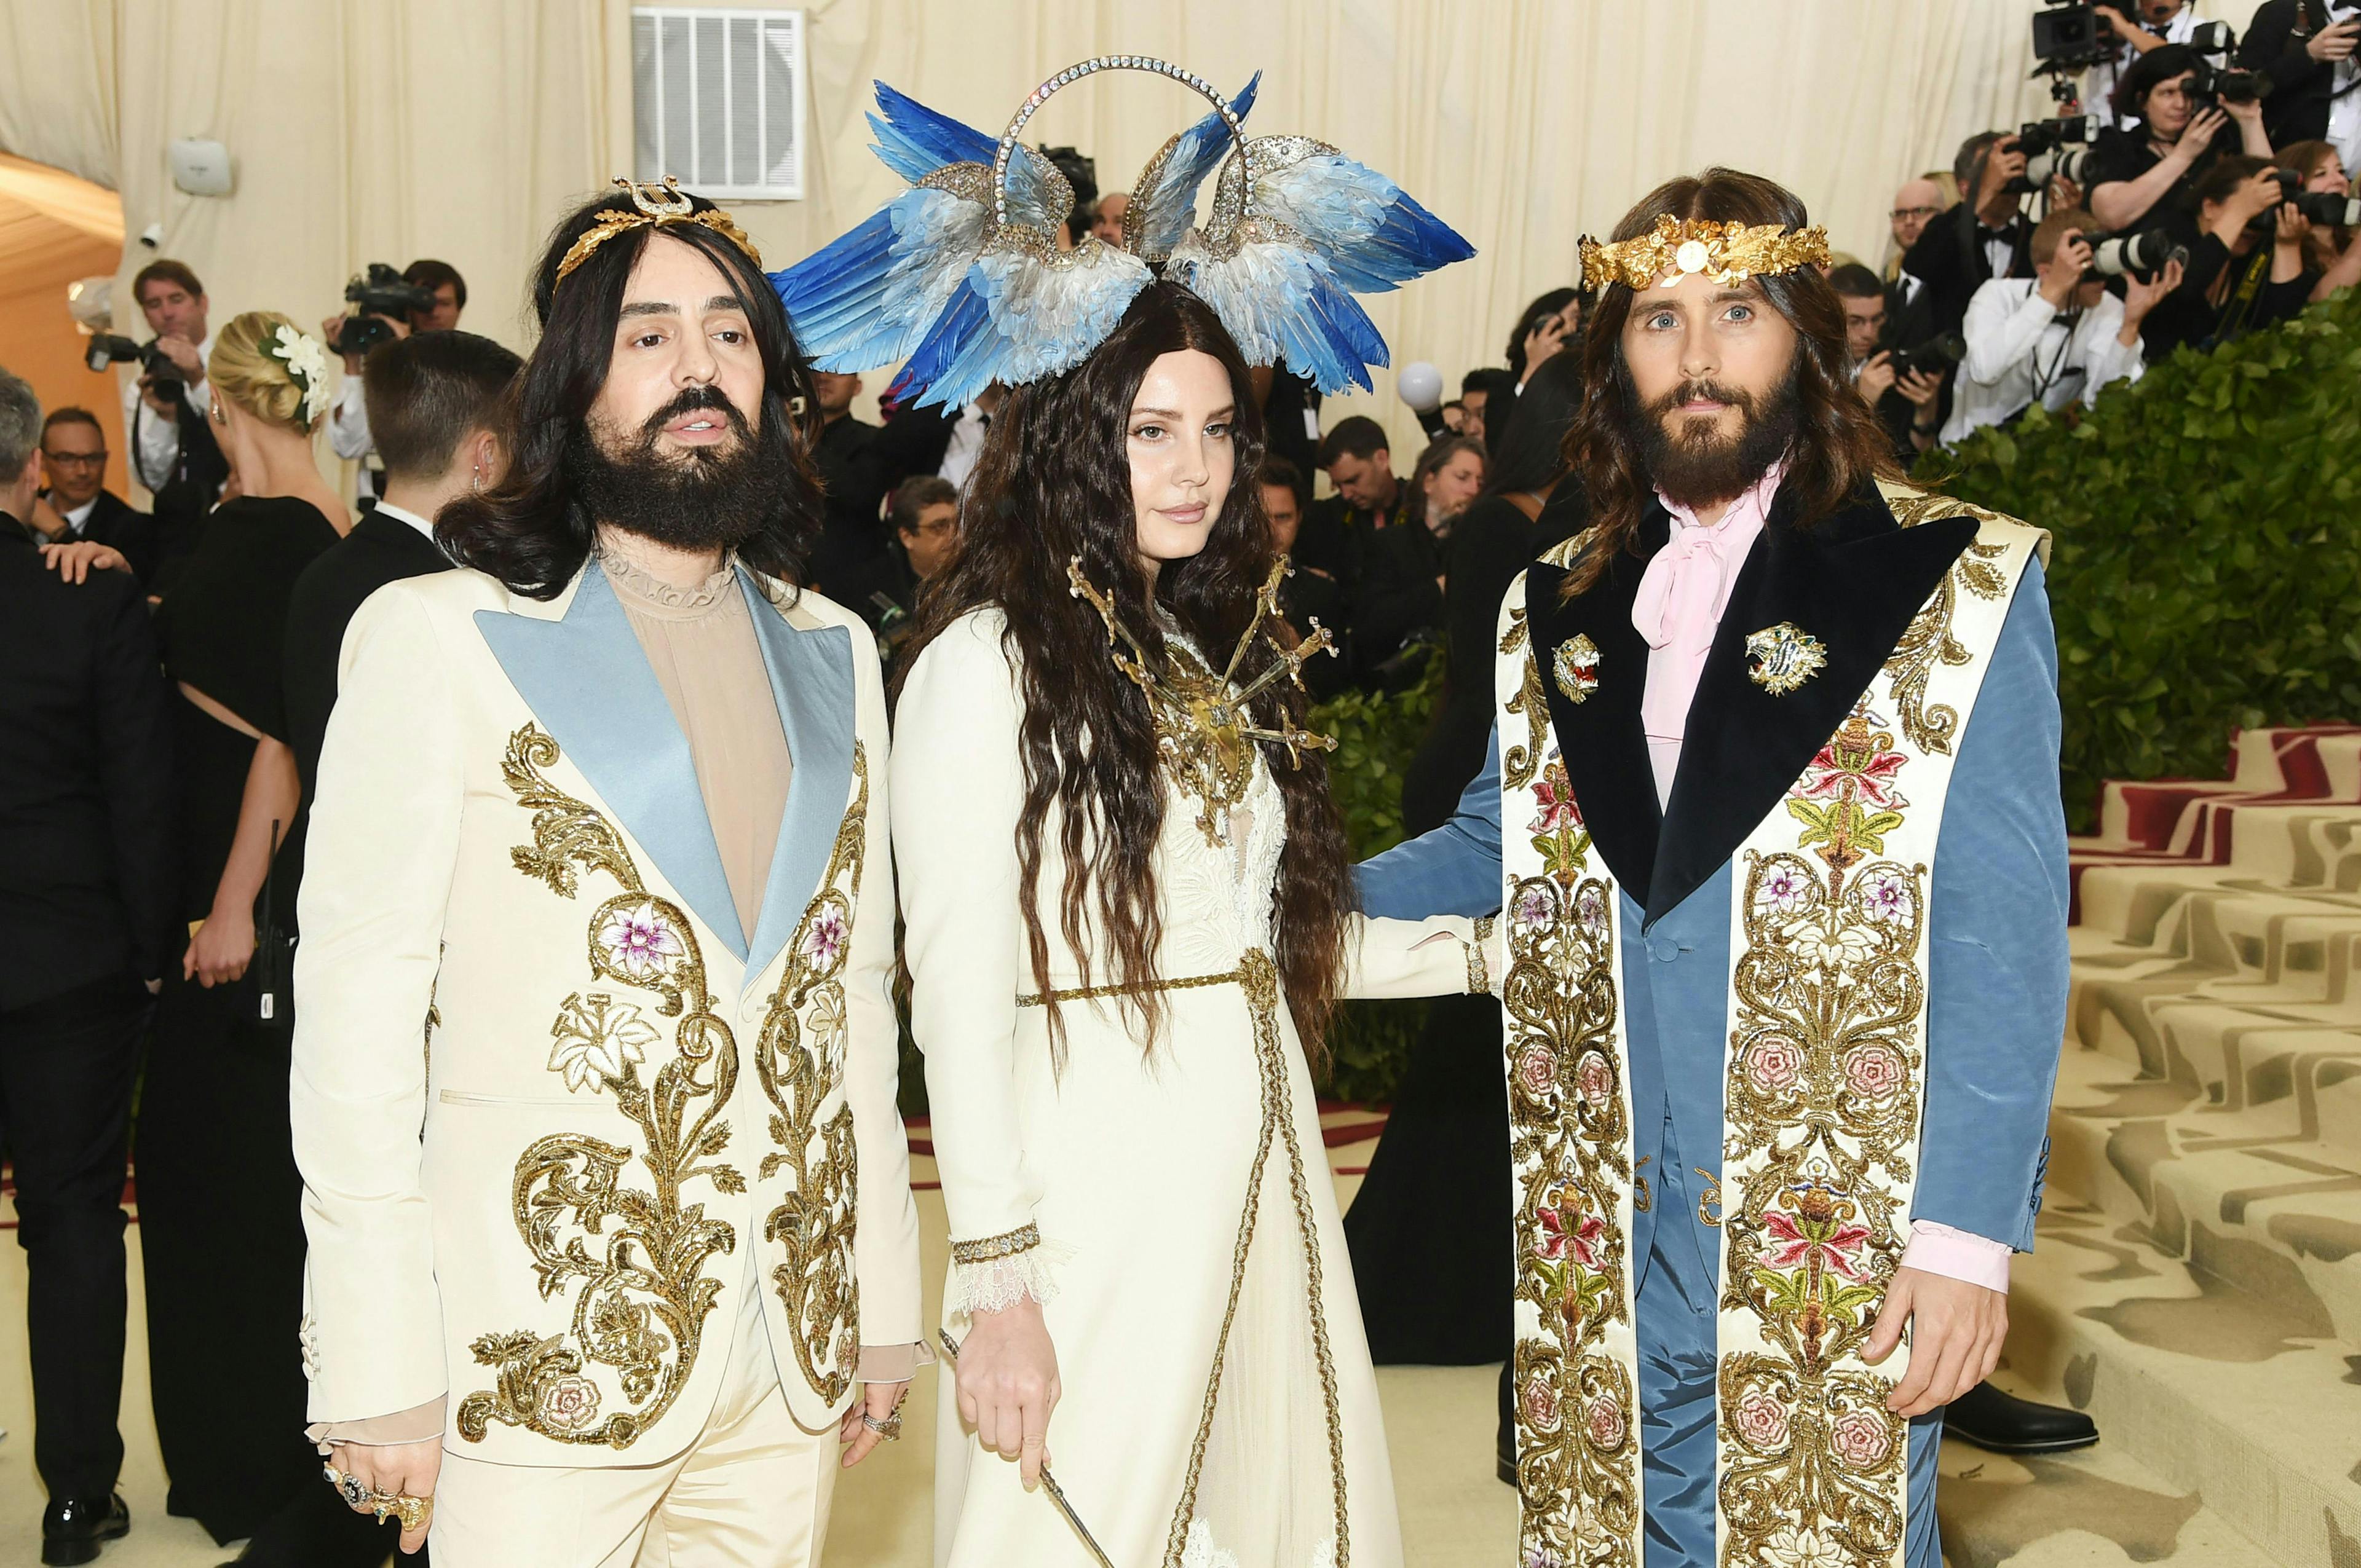 met gala met ball new york ny person human clothing apparel costume crowd